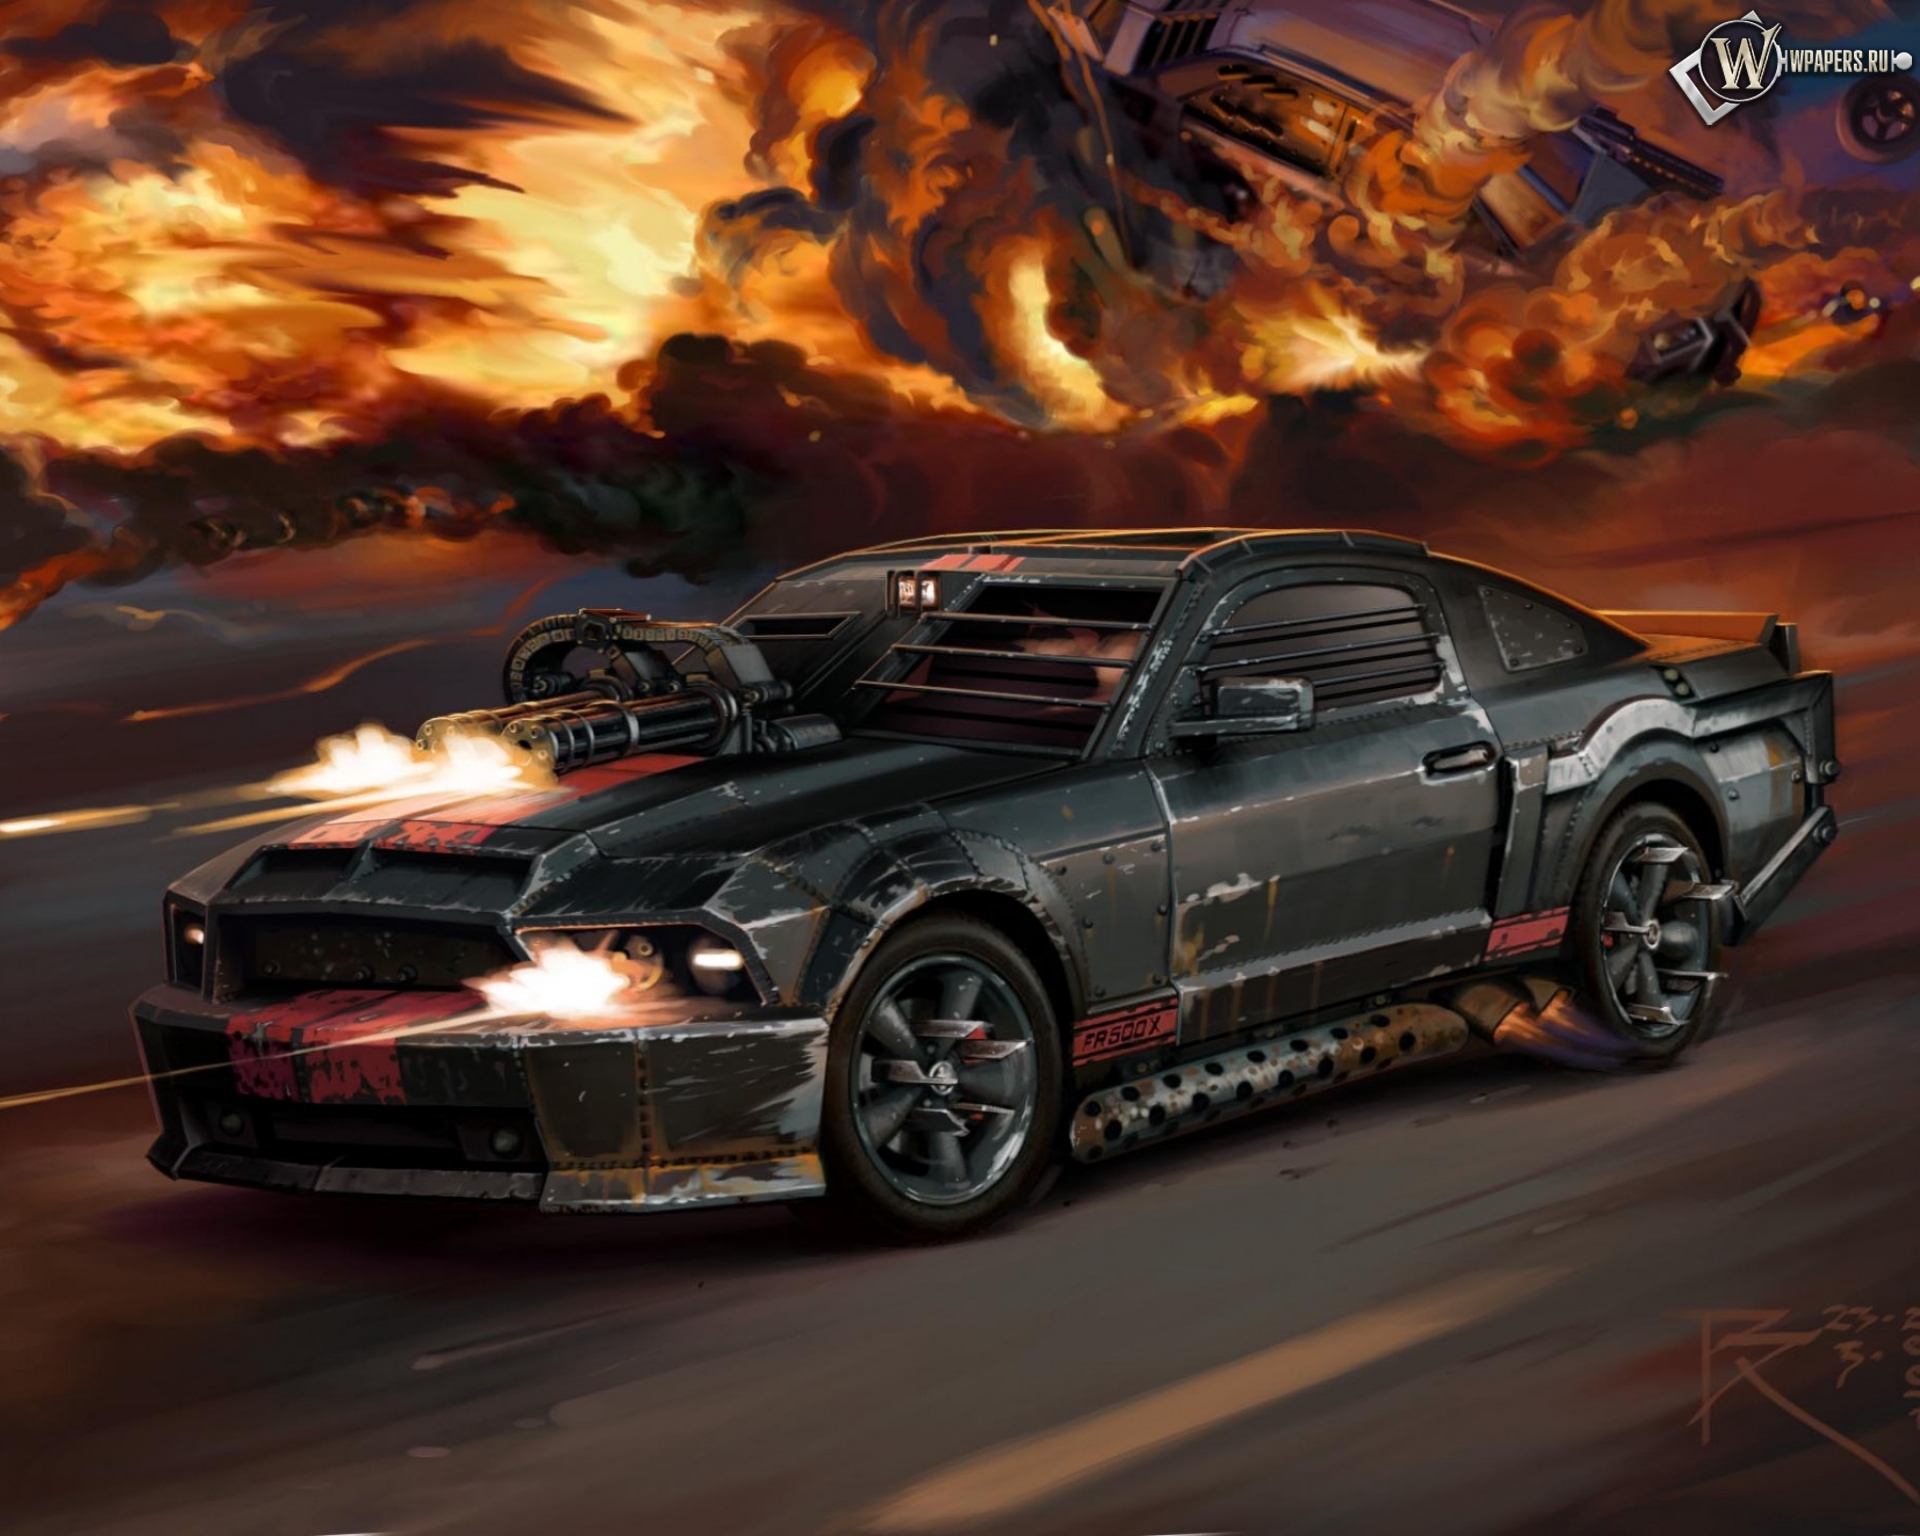 Car ford mustang death race 1920x1536